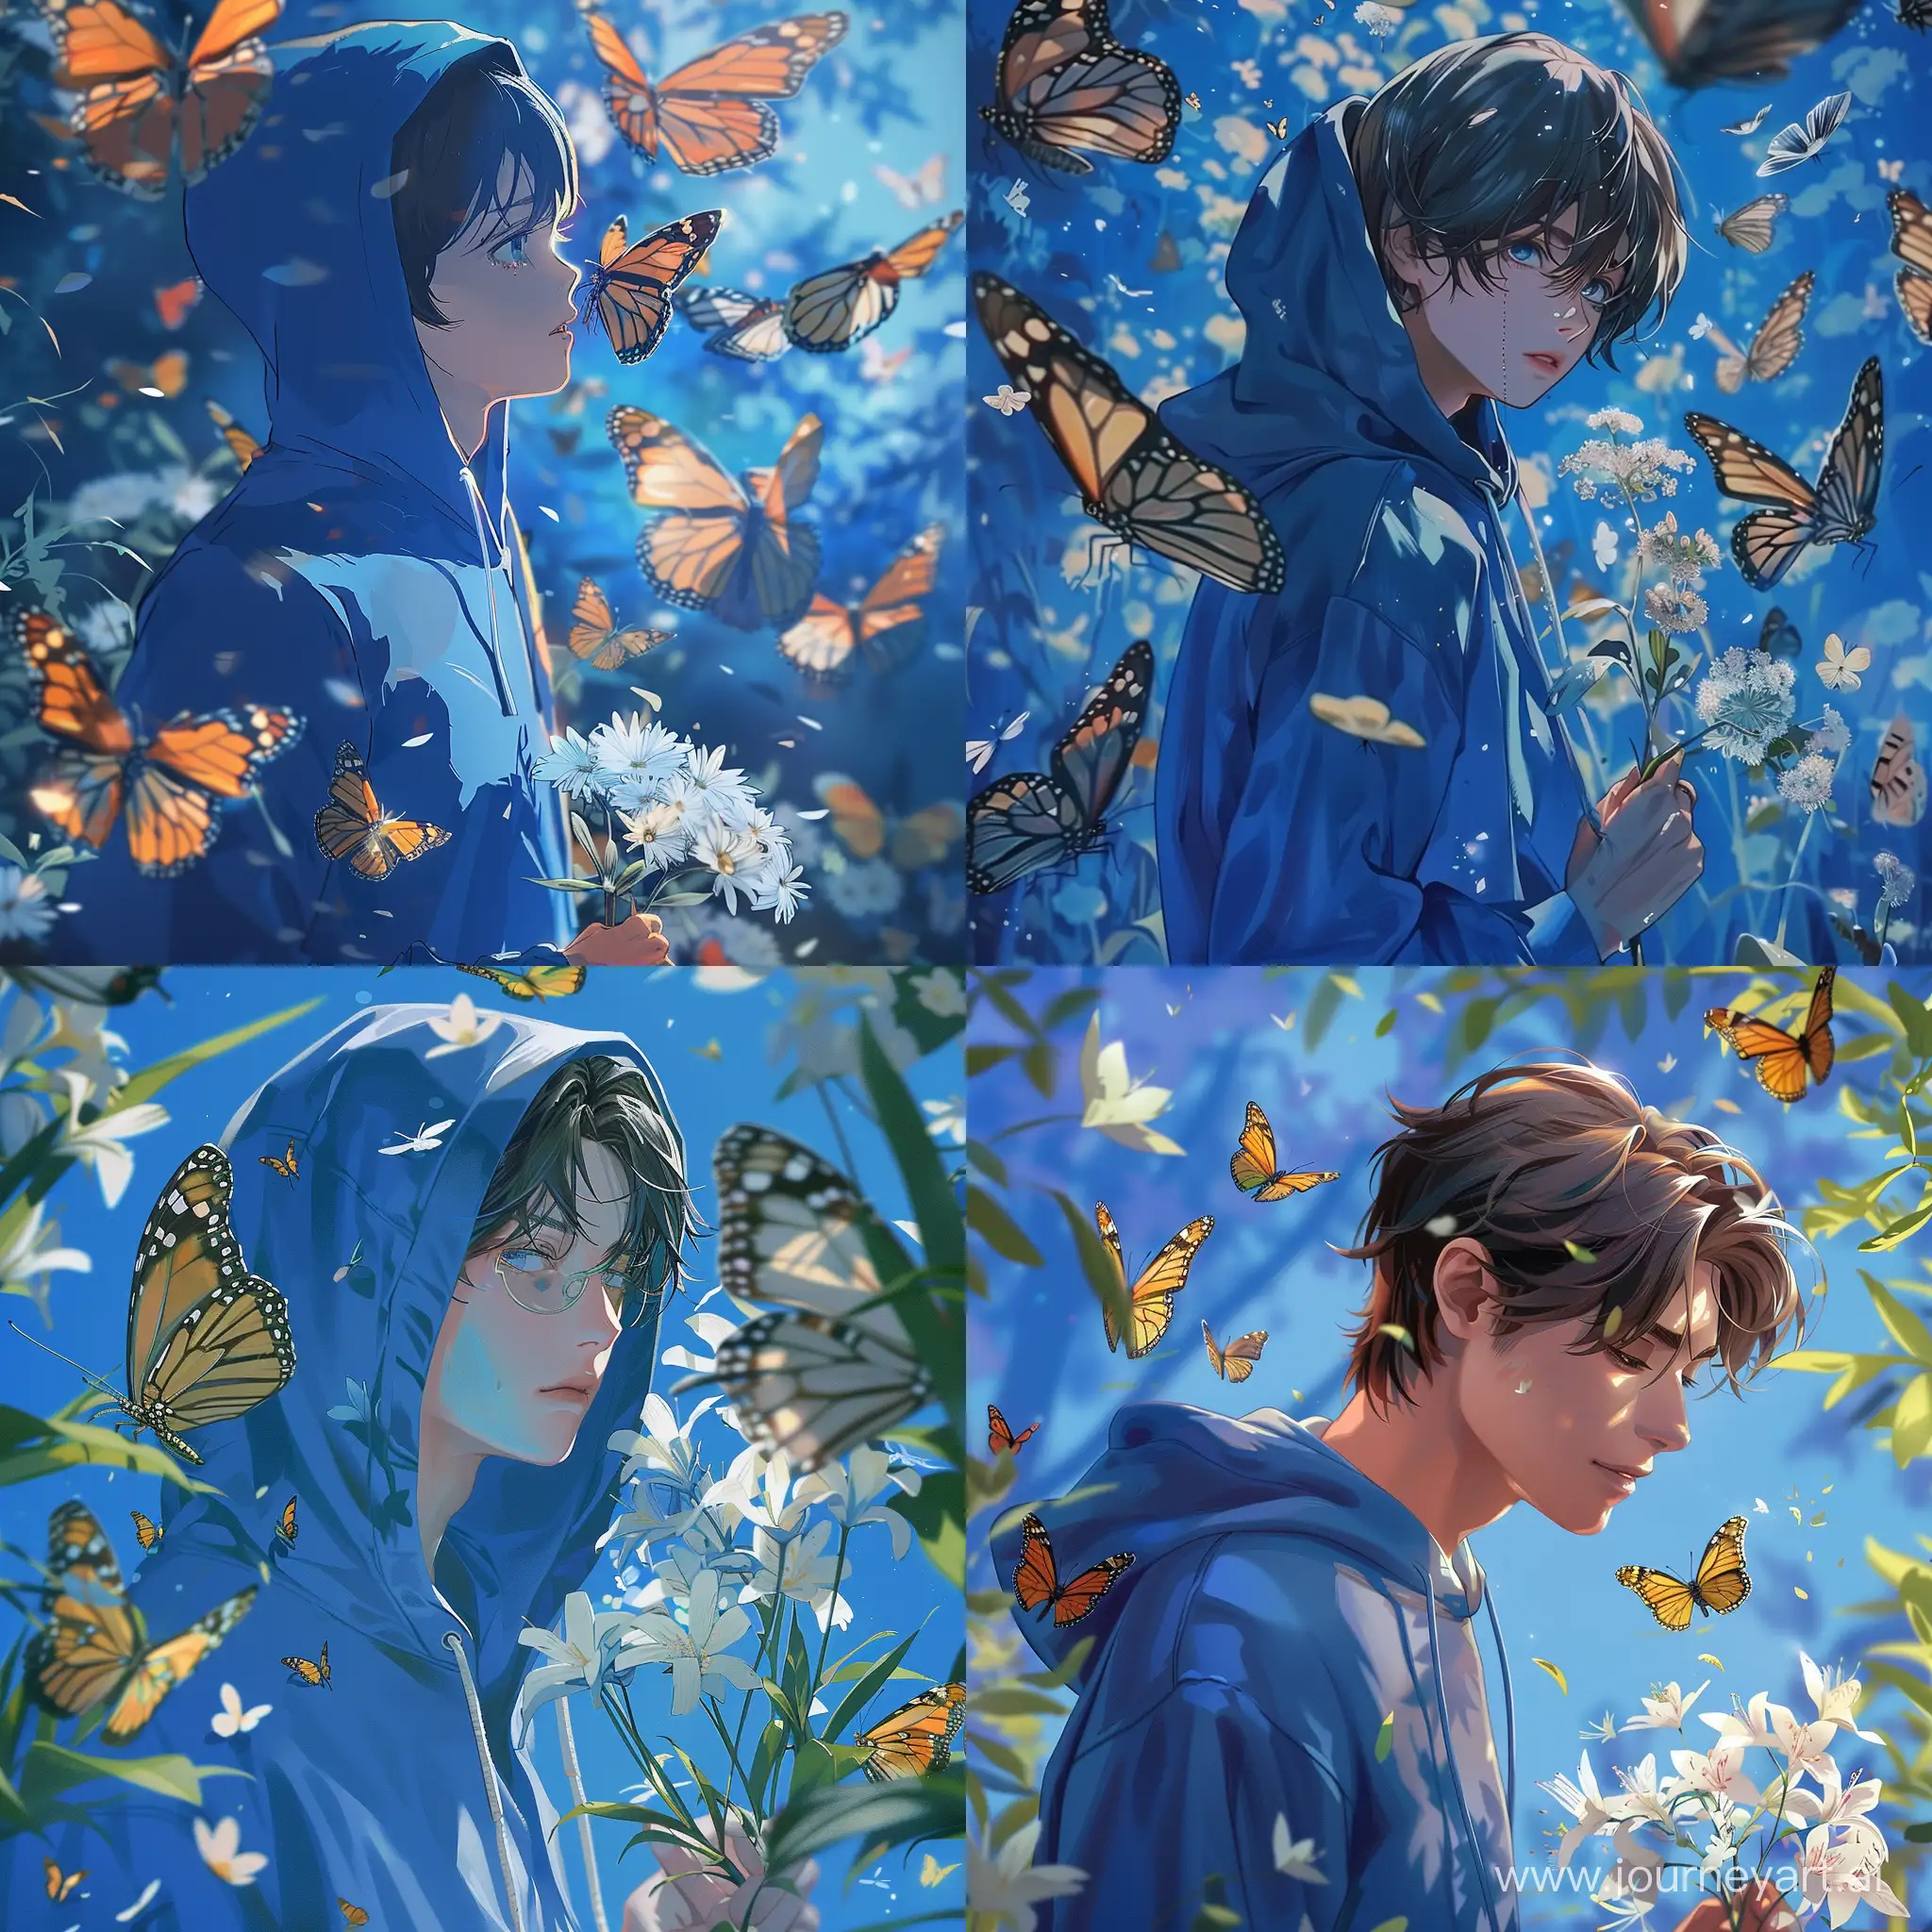 Anime-Man-in-Blue-Hoodie-Surrounded-by-Butterflies-Holding-White-Flowers